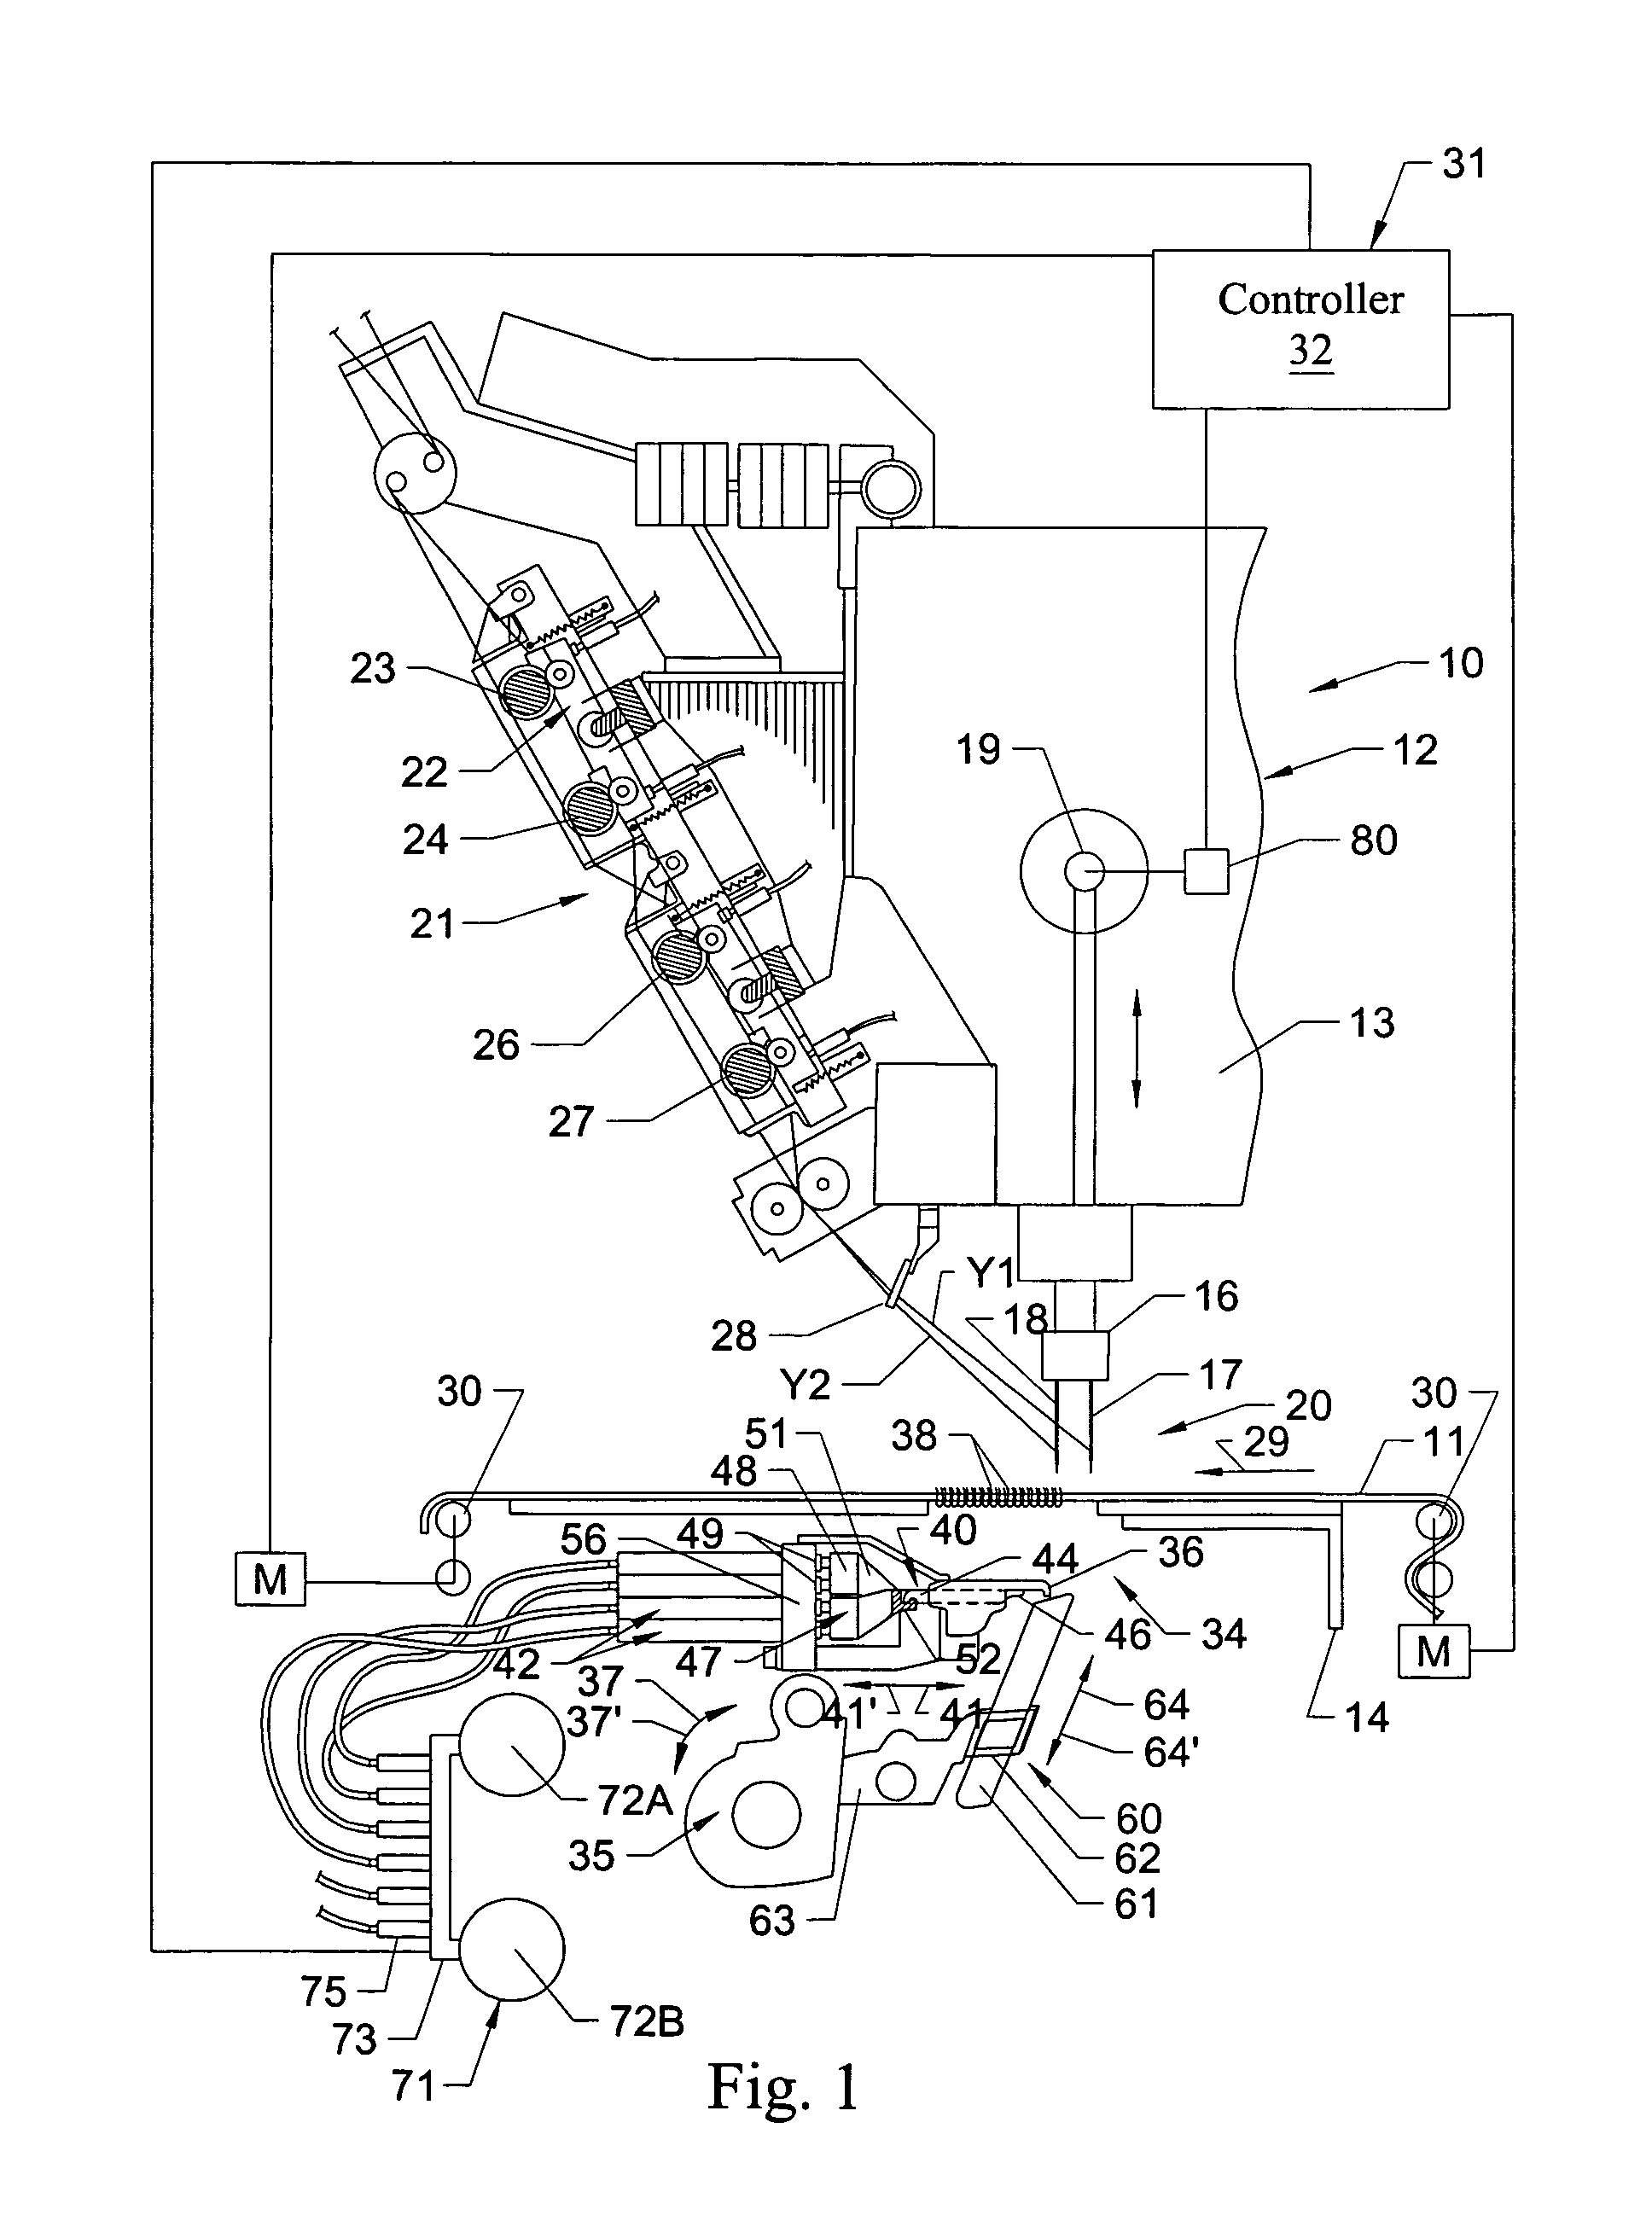 Control assembly for tufting machine